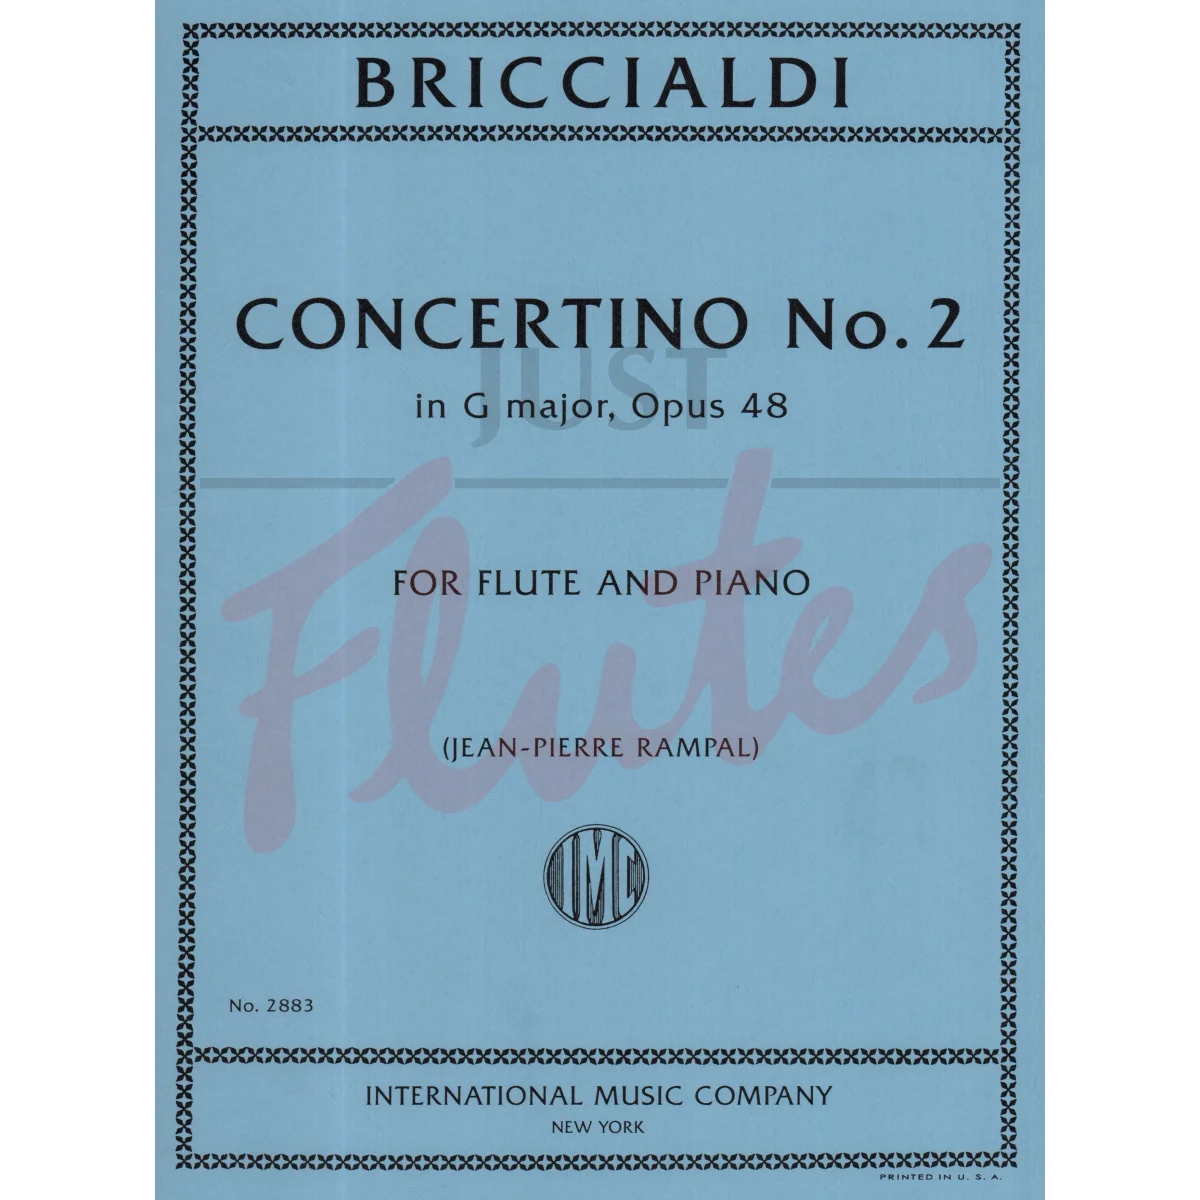 Concertino No. 2 in G major for Flute and Piano